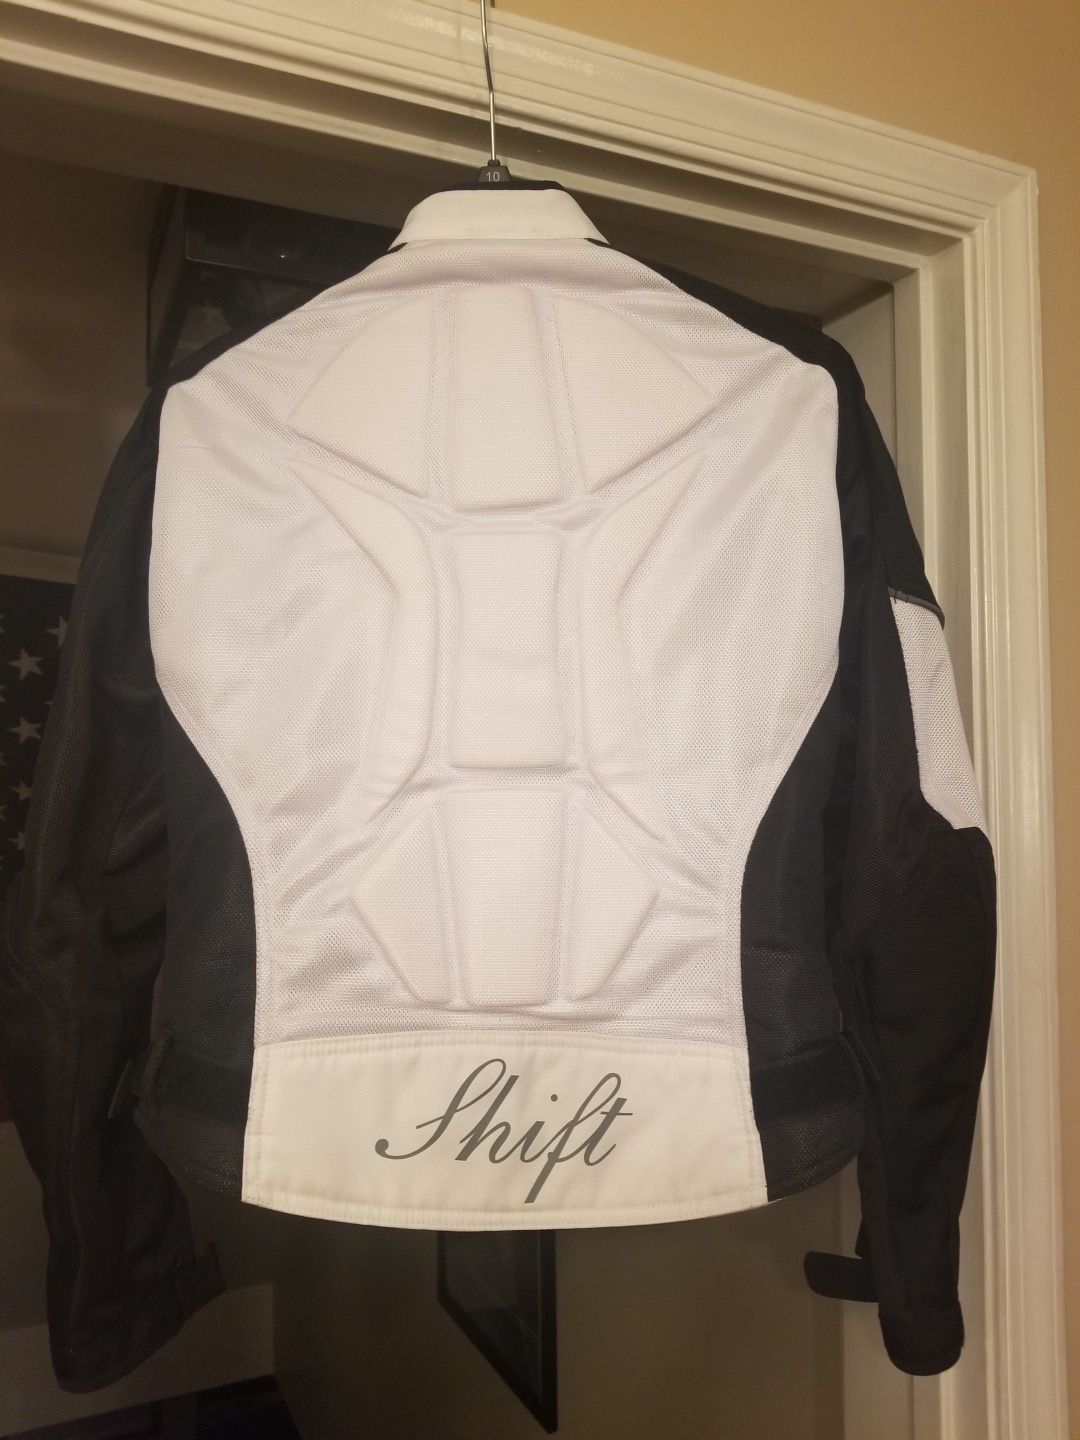 Women's Shift motorcycle riding jacket with armor